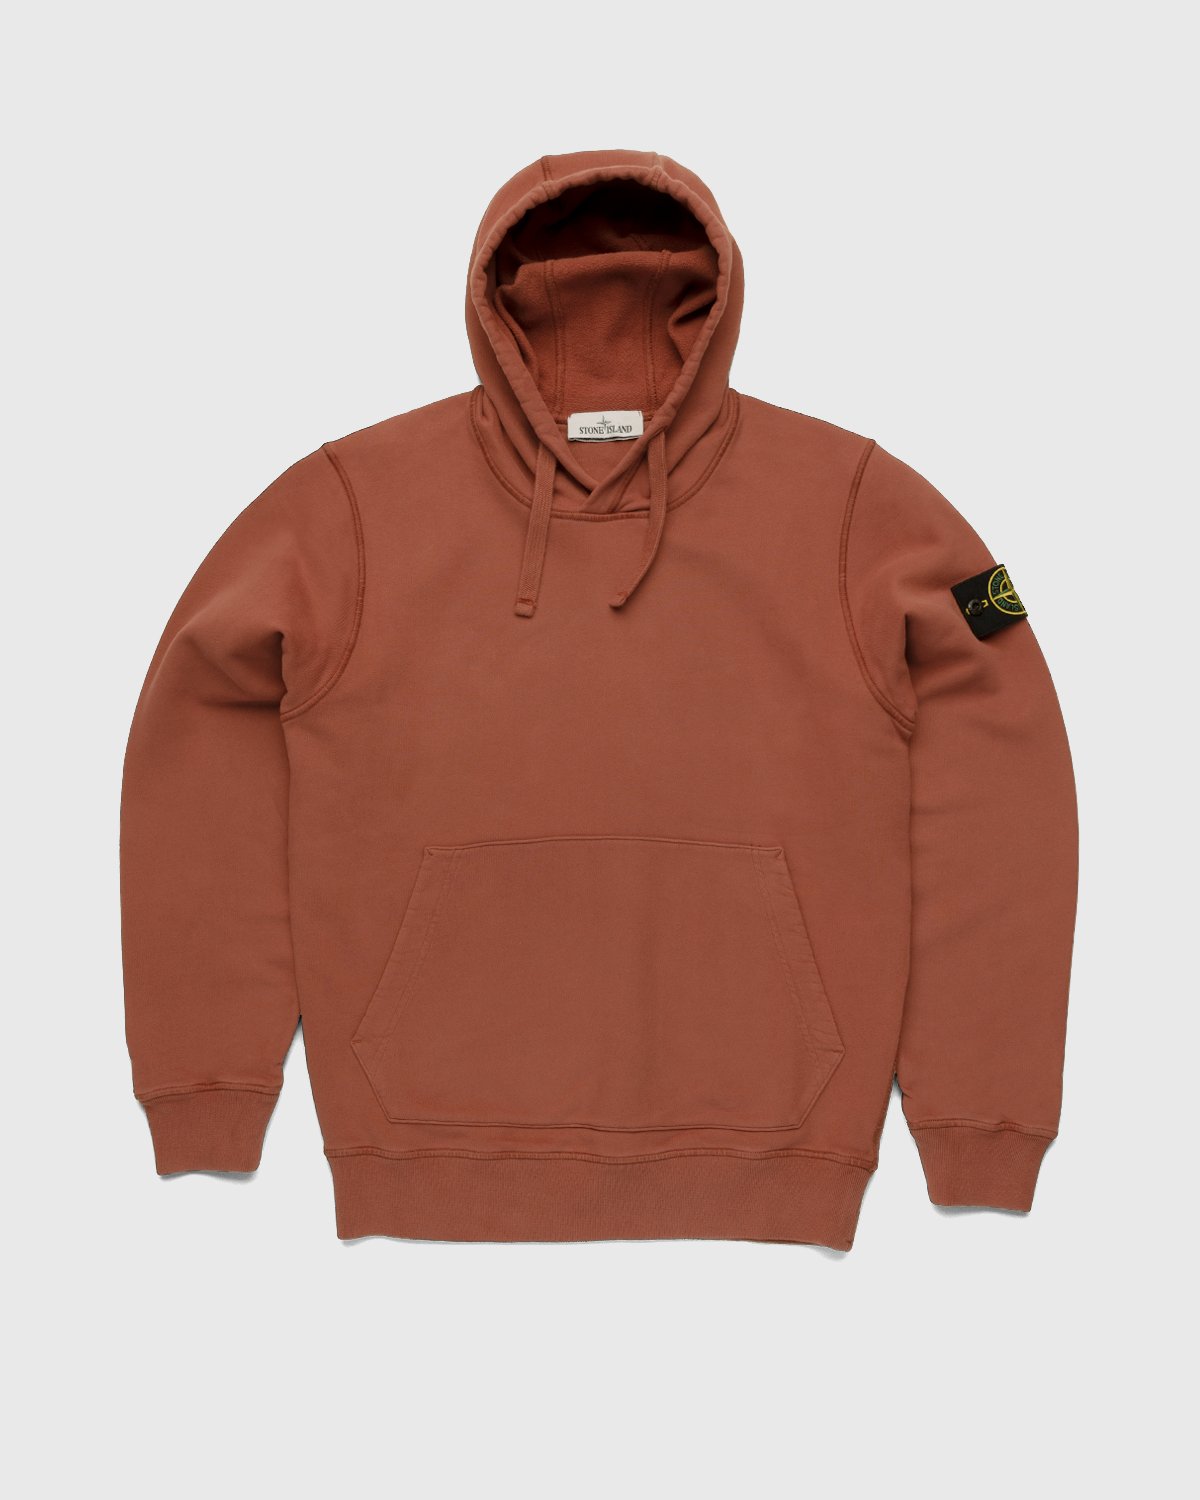 Stone Island - Dust Color Treatment Hoodie Brick Red - Clothing - Red - Image 1